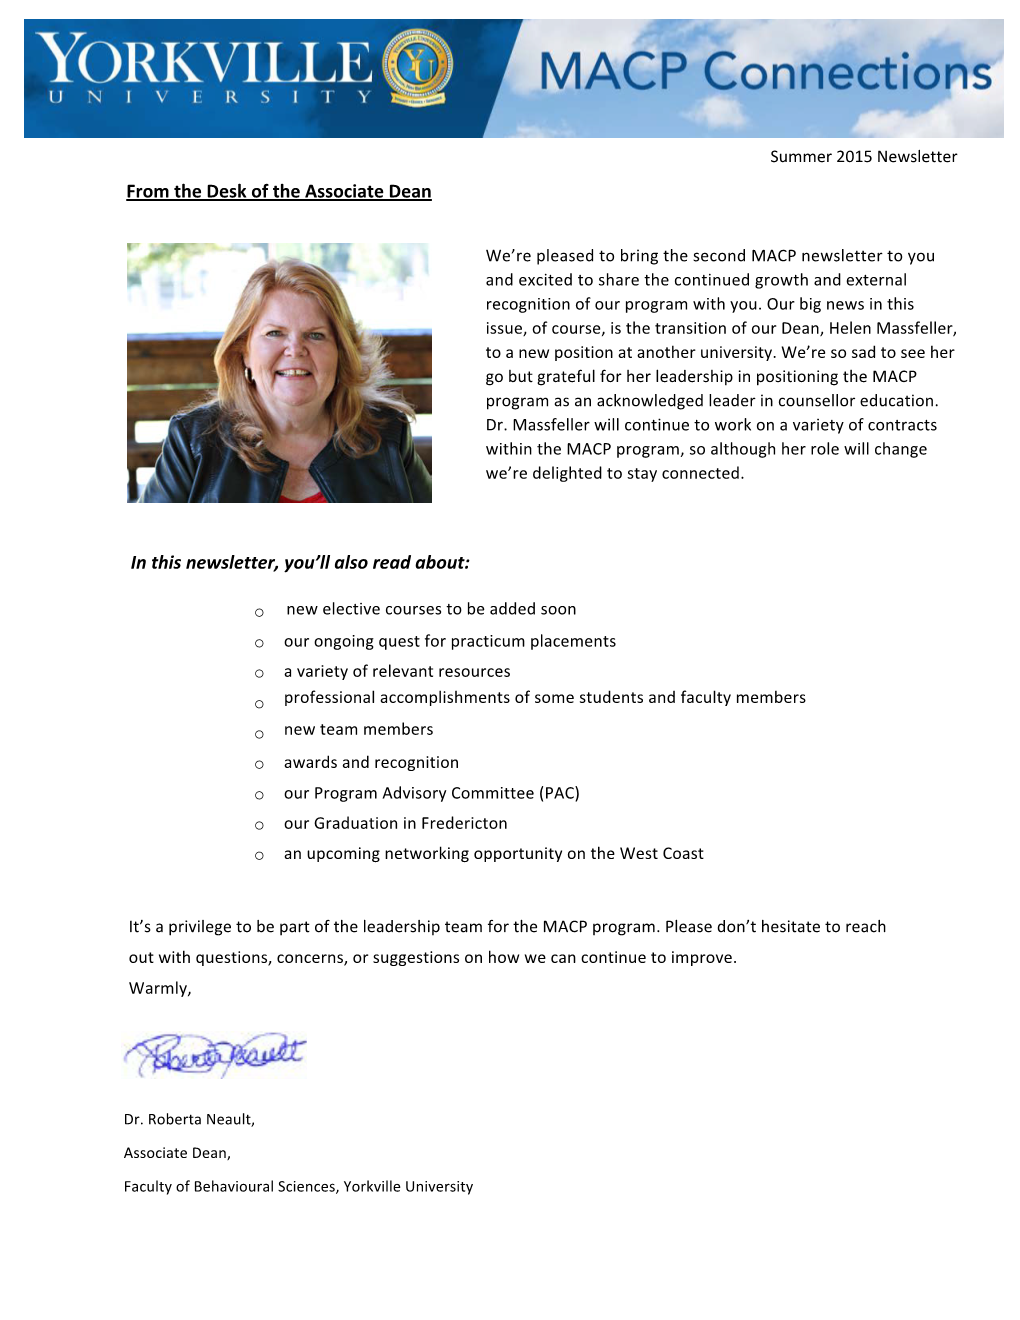 From the Desk of the Associate Dean in This Newsletter, You'll Also Read